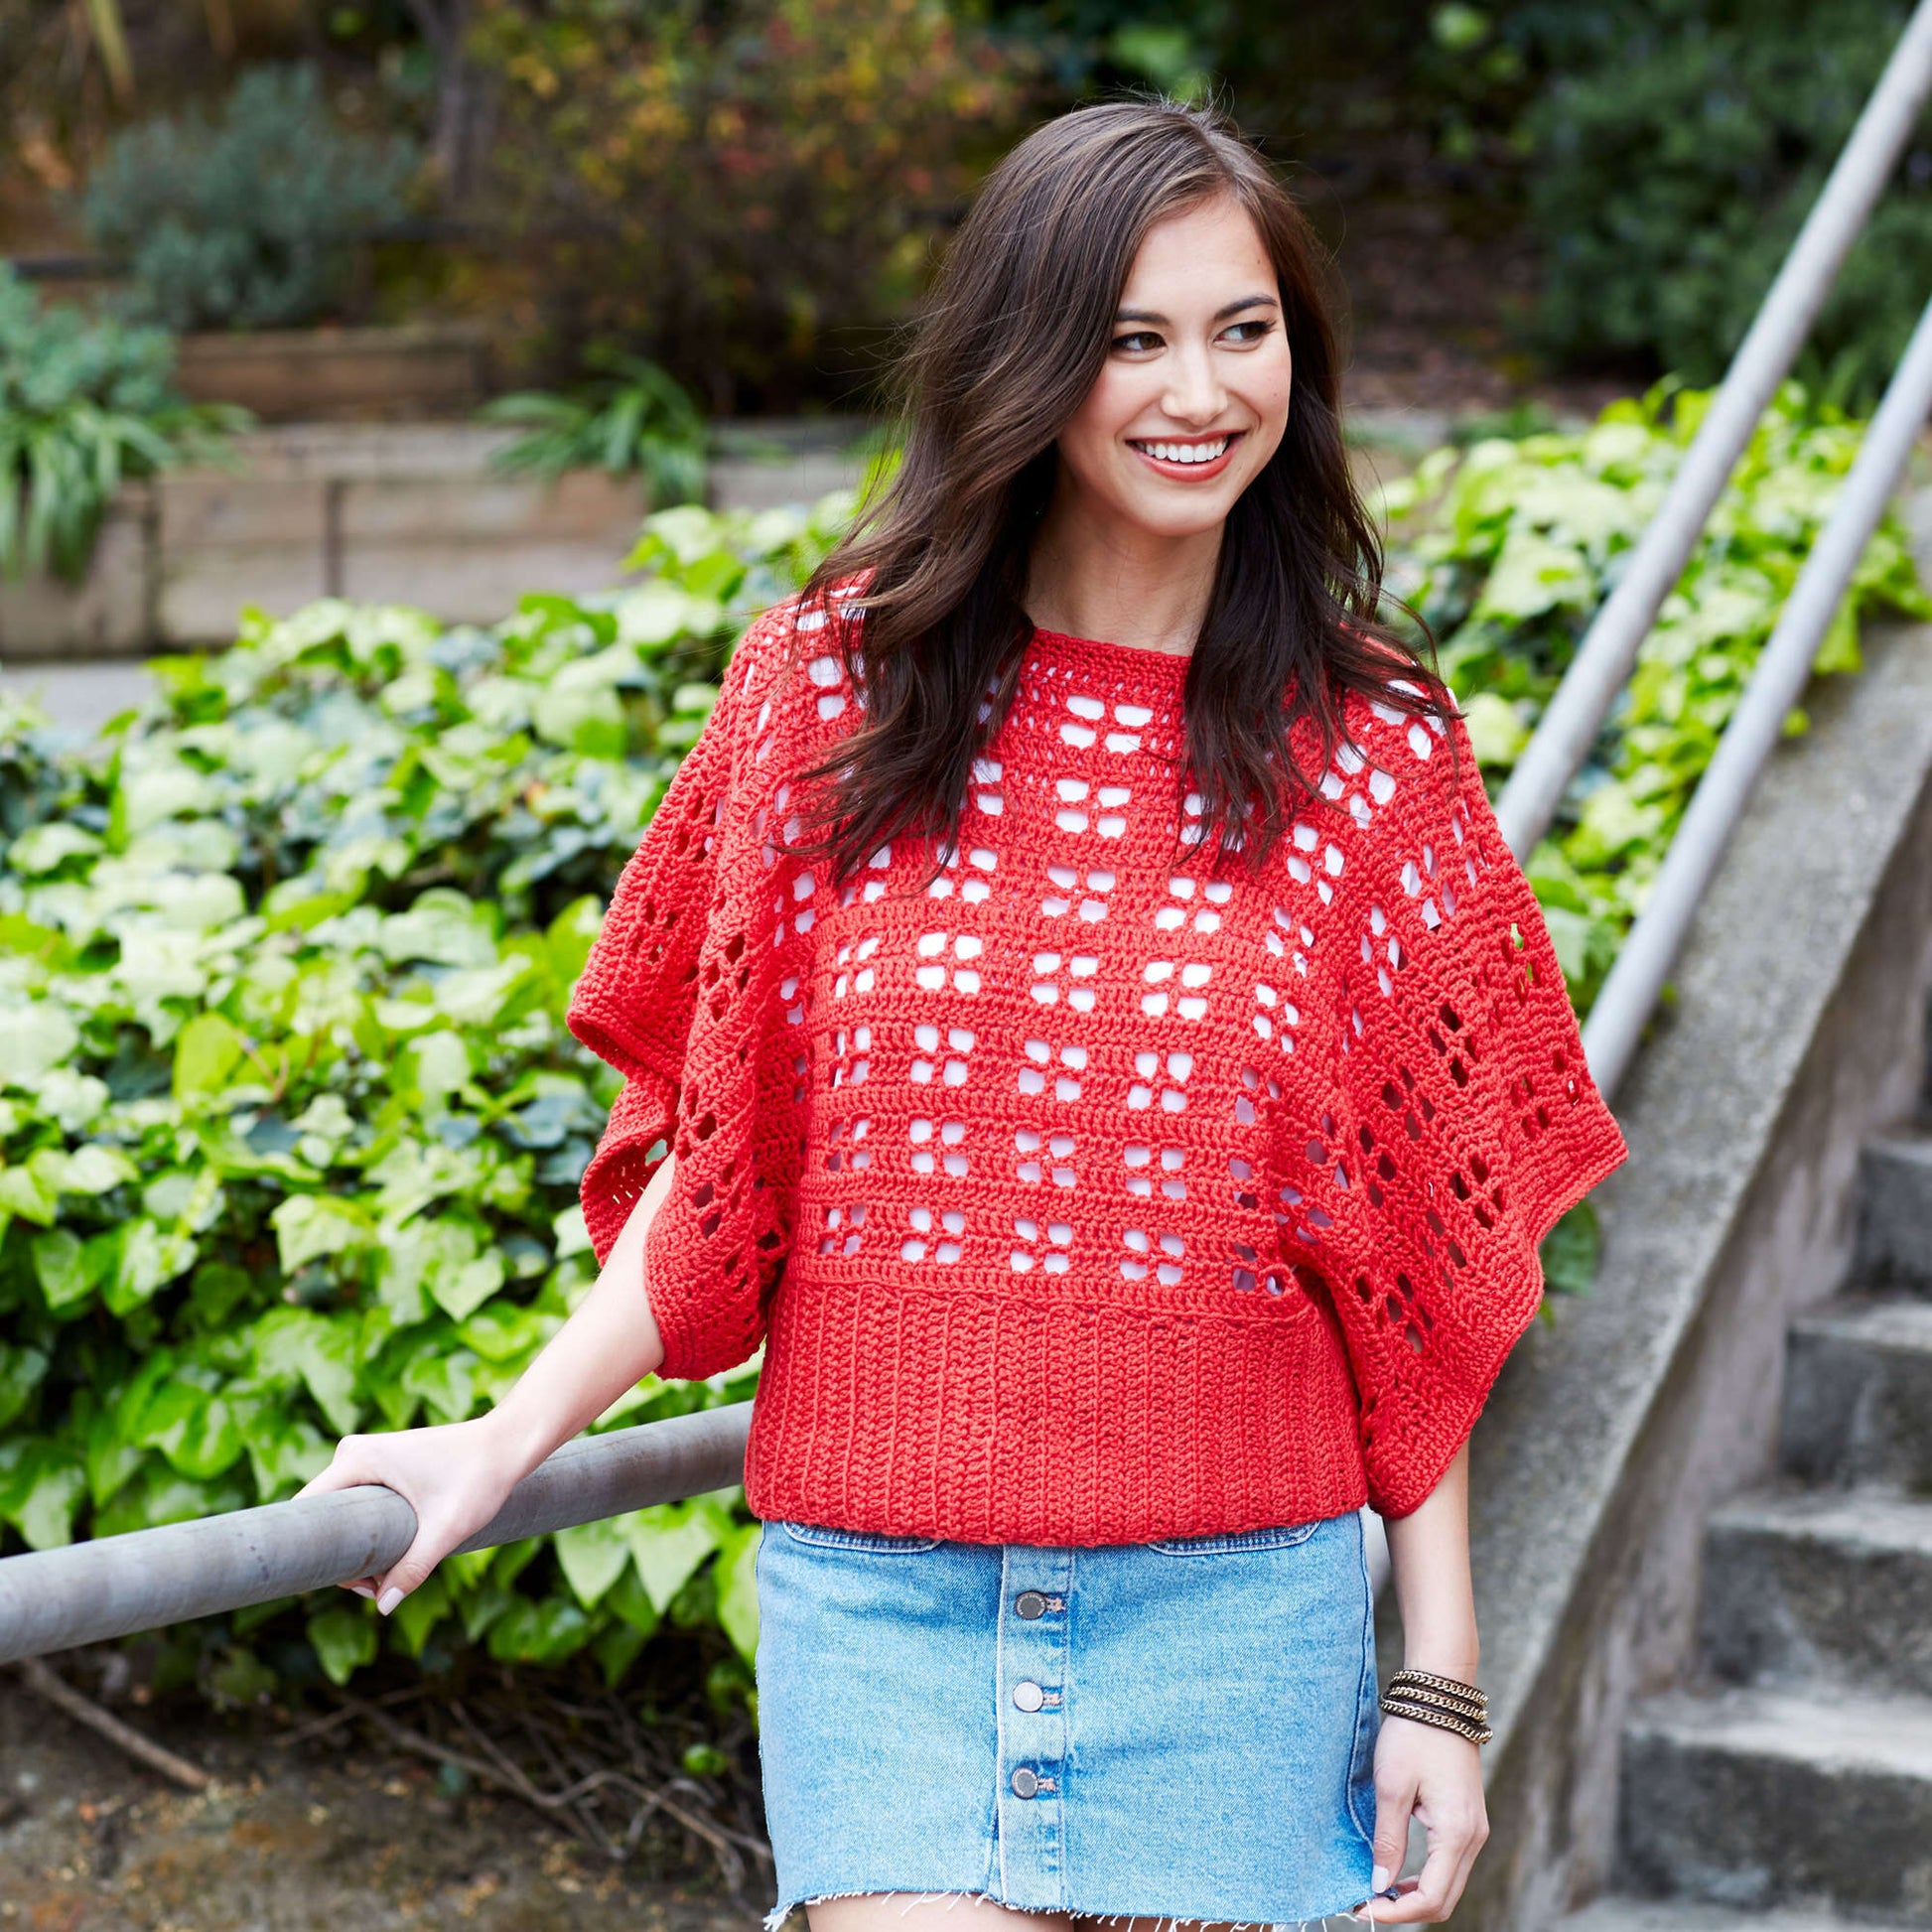 Free Red Heart Clementine Chic Sweater Pattern